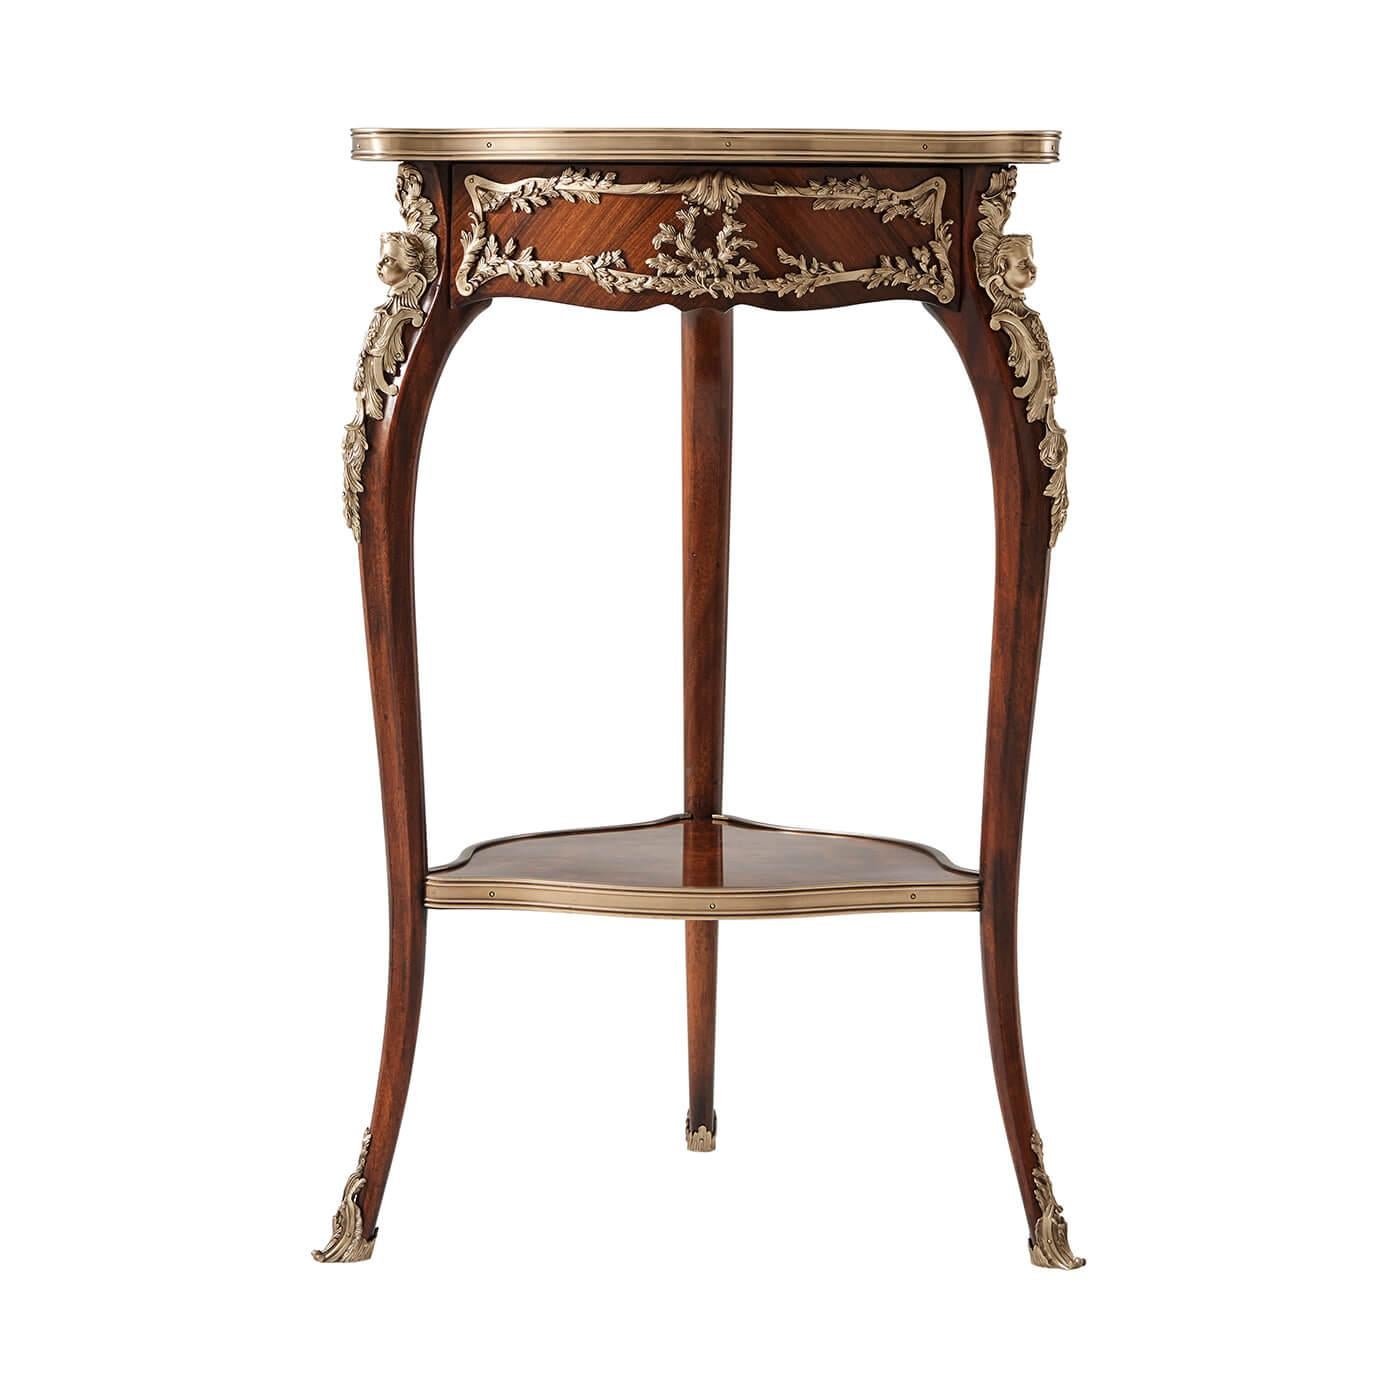 A French Louis XV style mahogany and ormolu mounted occasional table, the brass bound shaped three-sided table top above a rosewood veneered frieze enclosed by foliate mounts, on three cabriole legs with caryatid mounts terminating in sabots, united